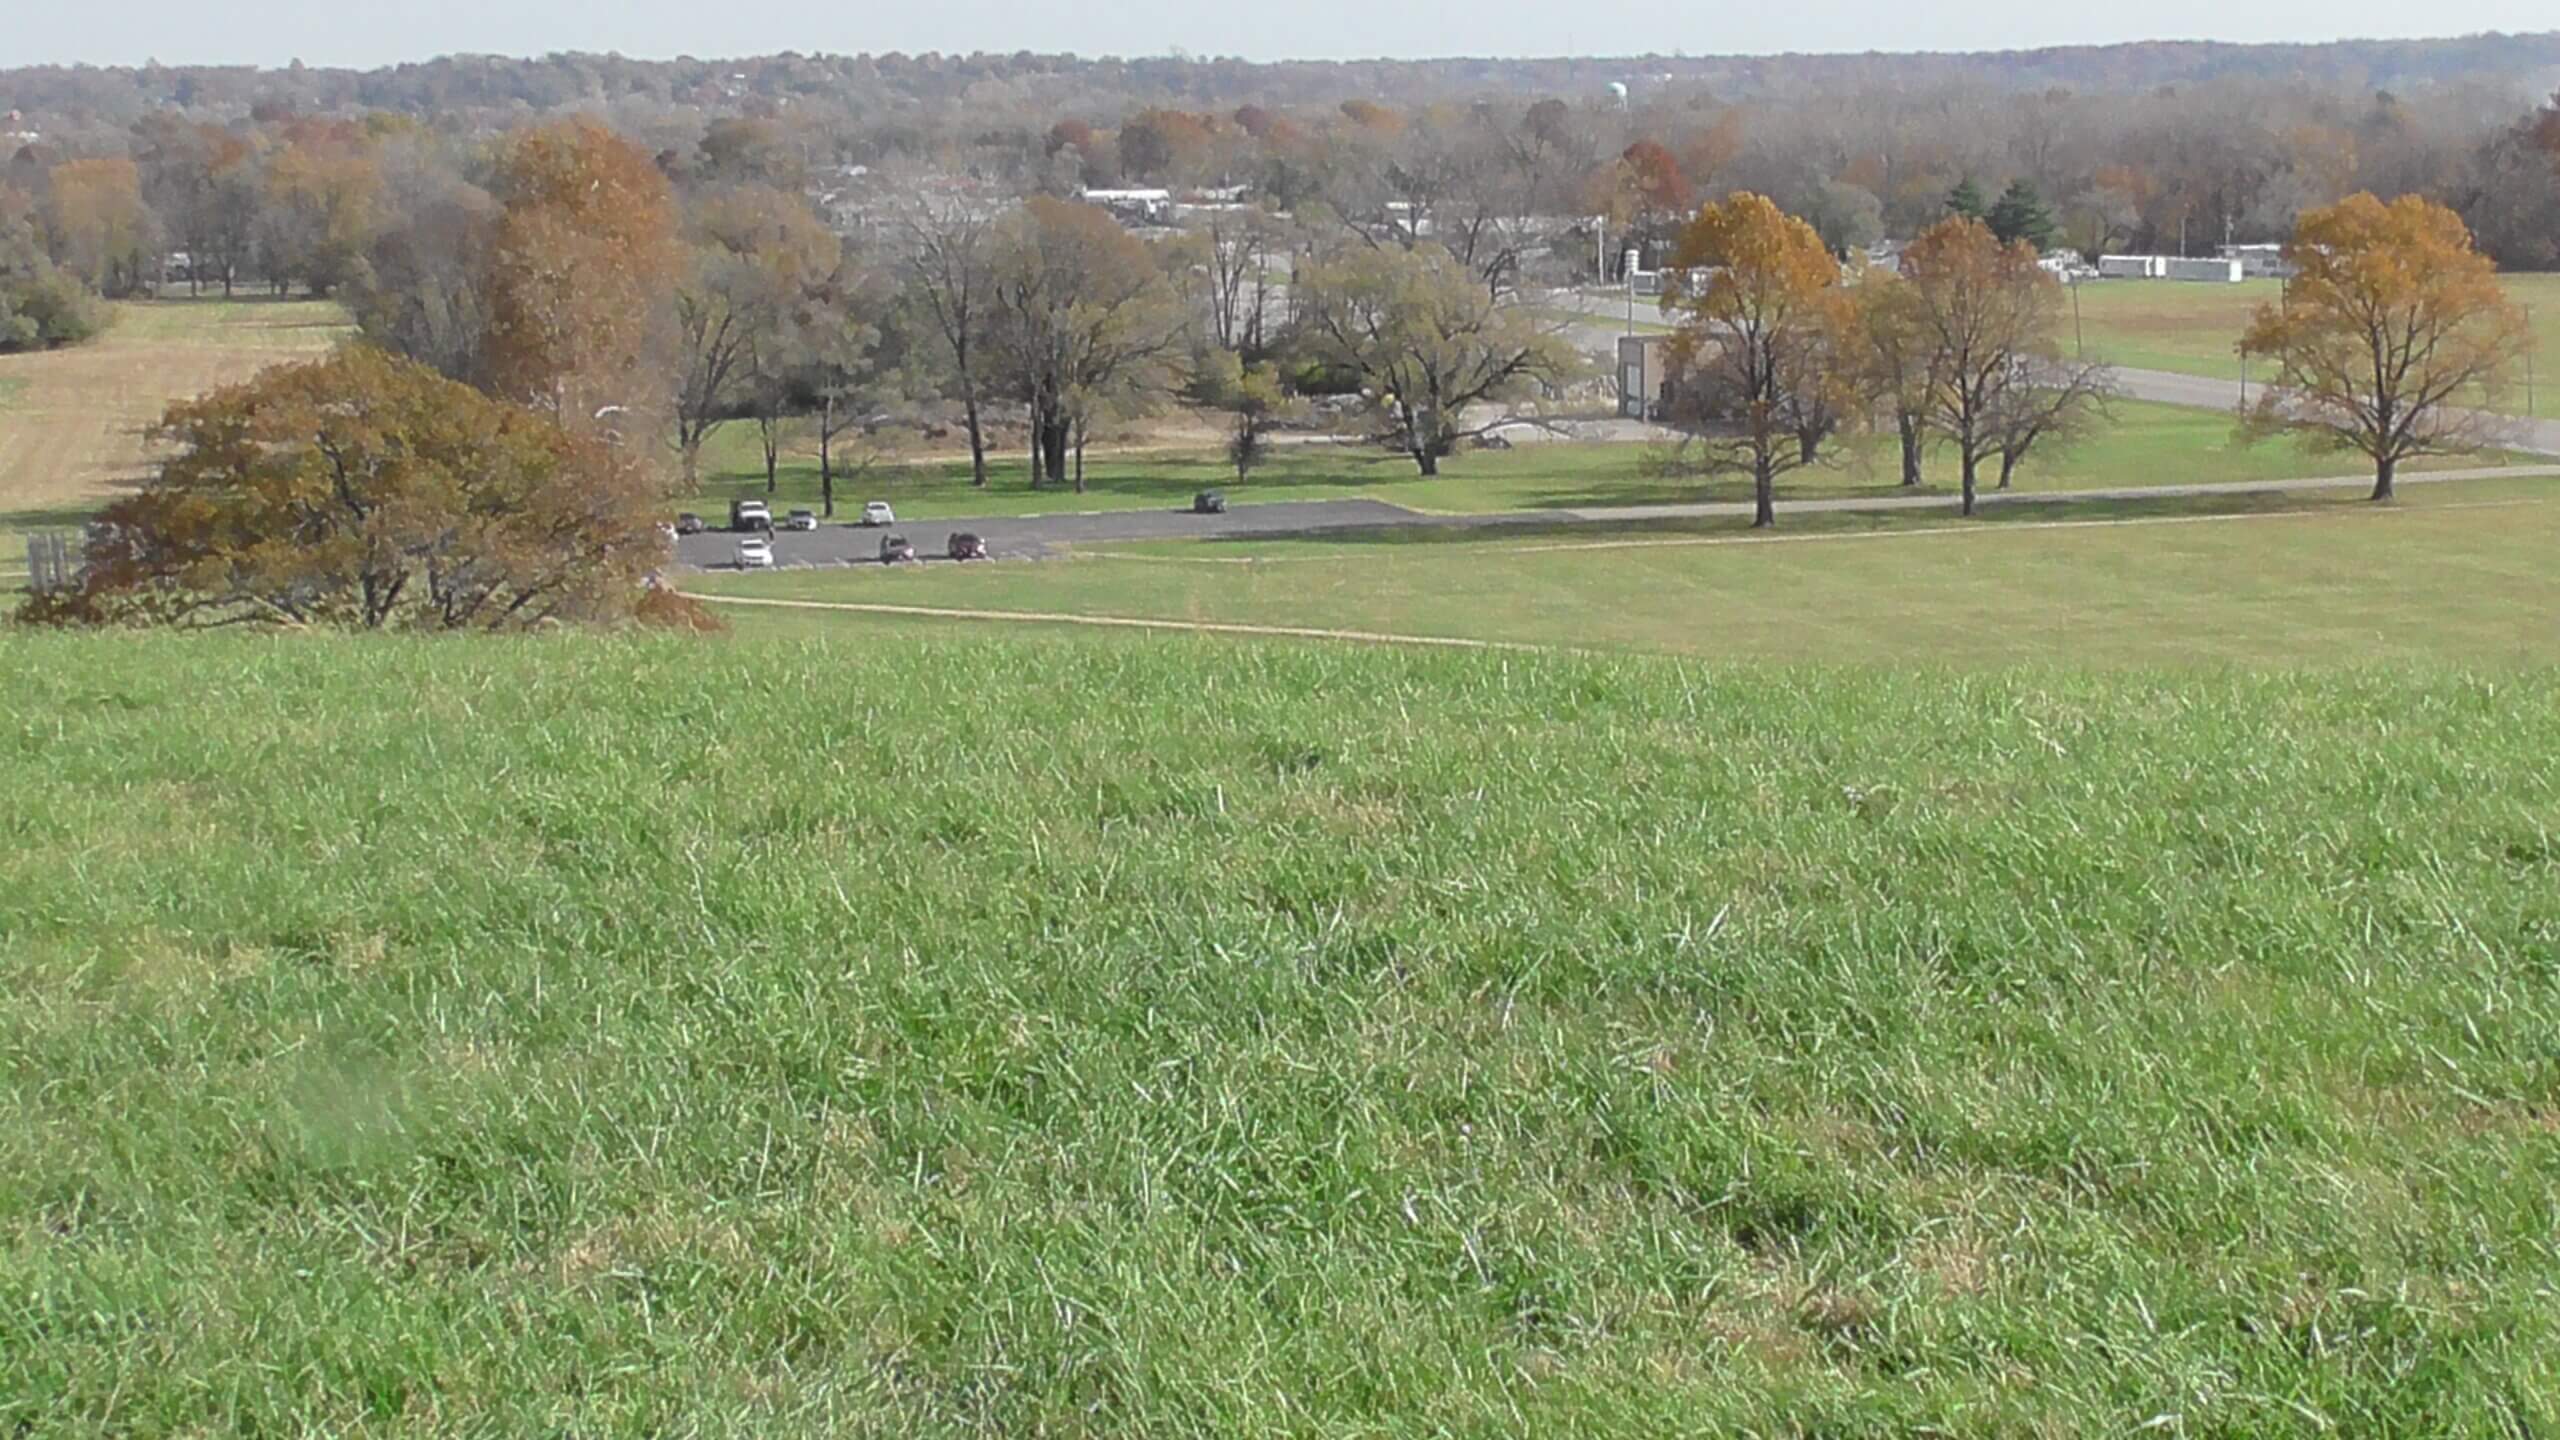 Looking East from Monk's Mound